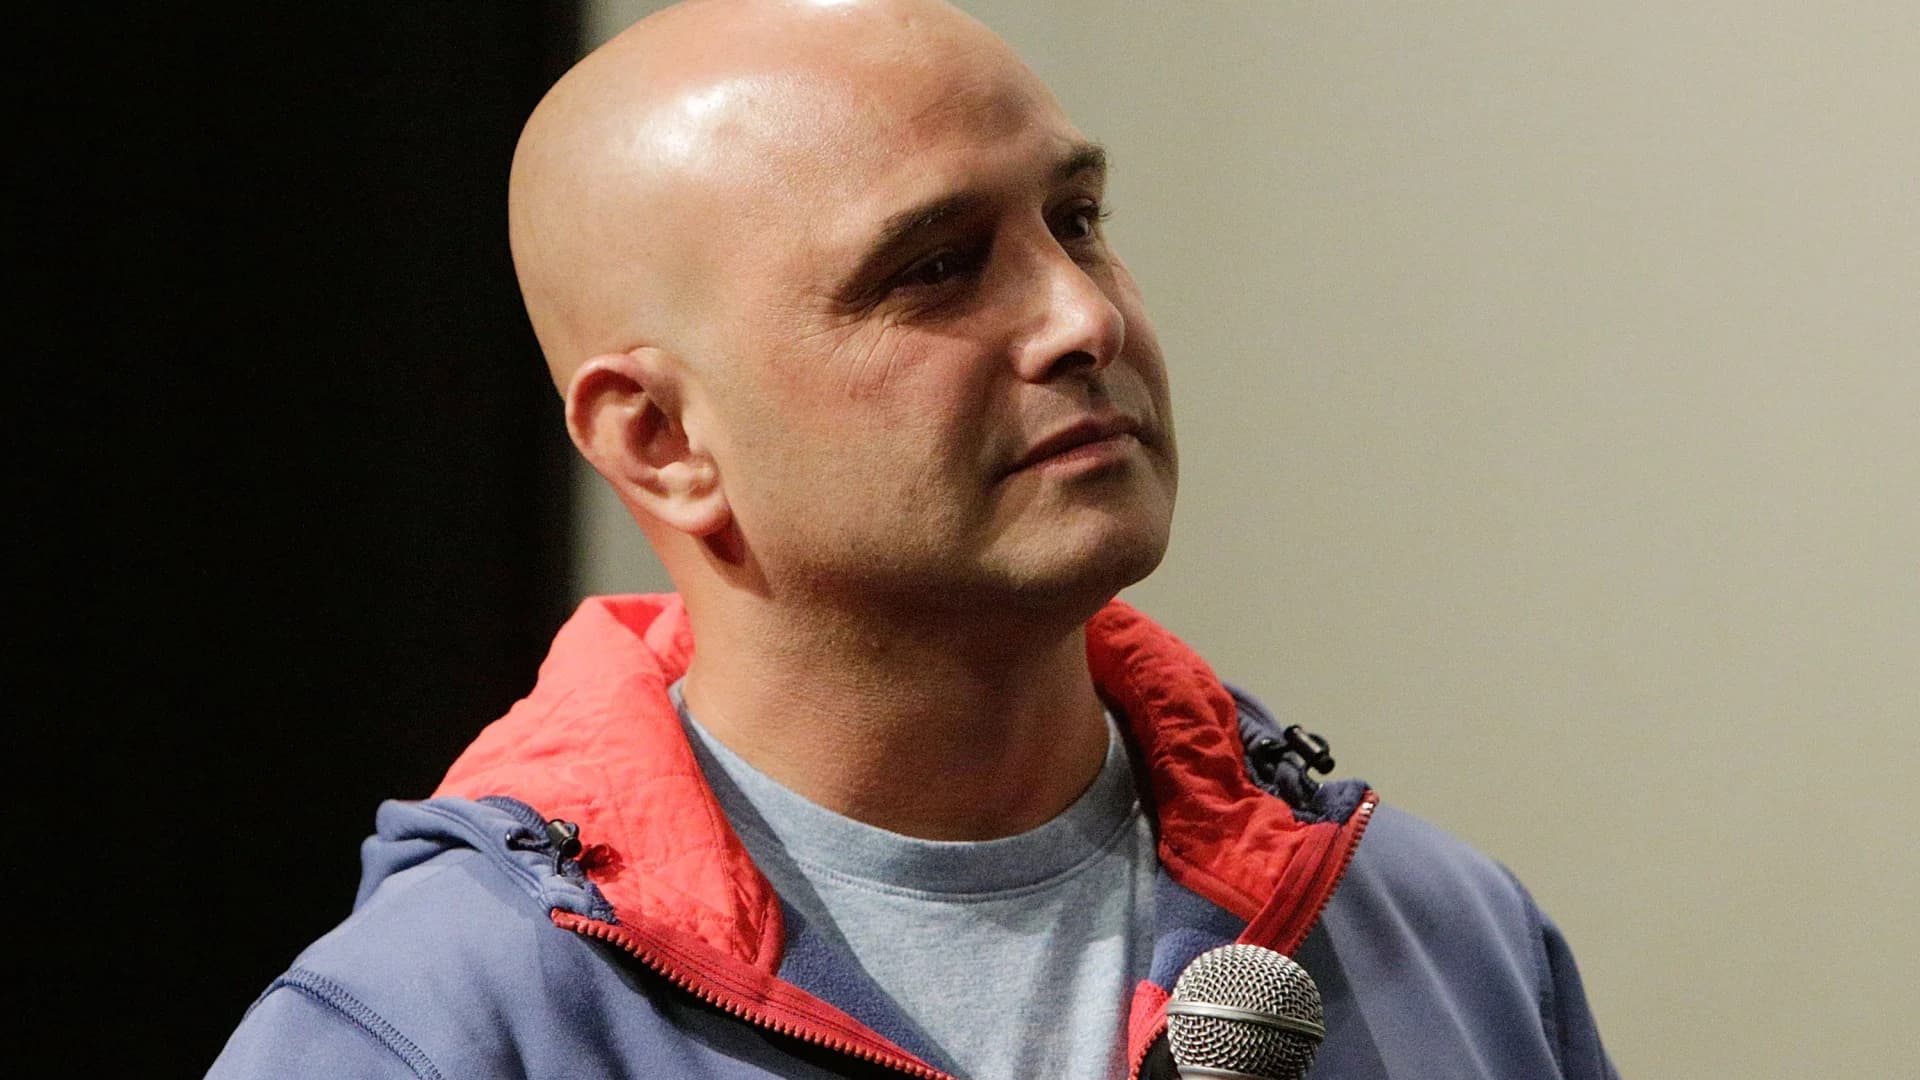 After arrest, radio host quits 'Boomer and Carton' show